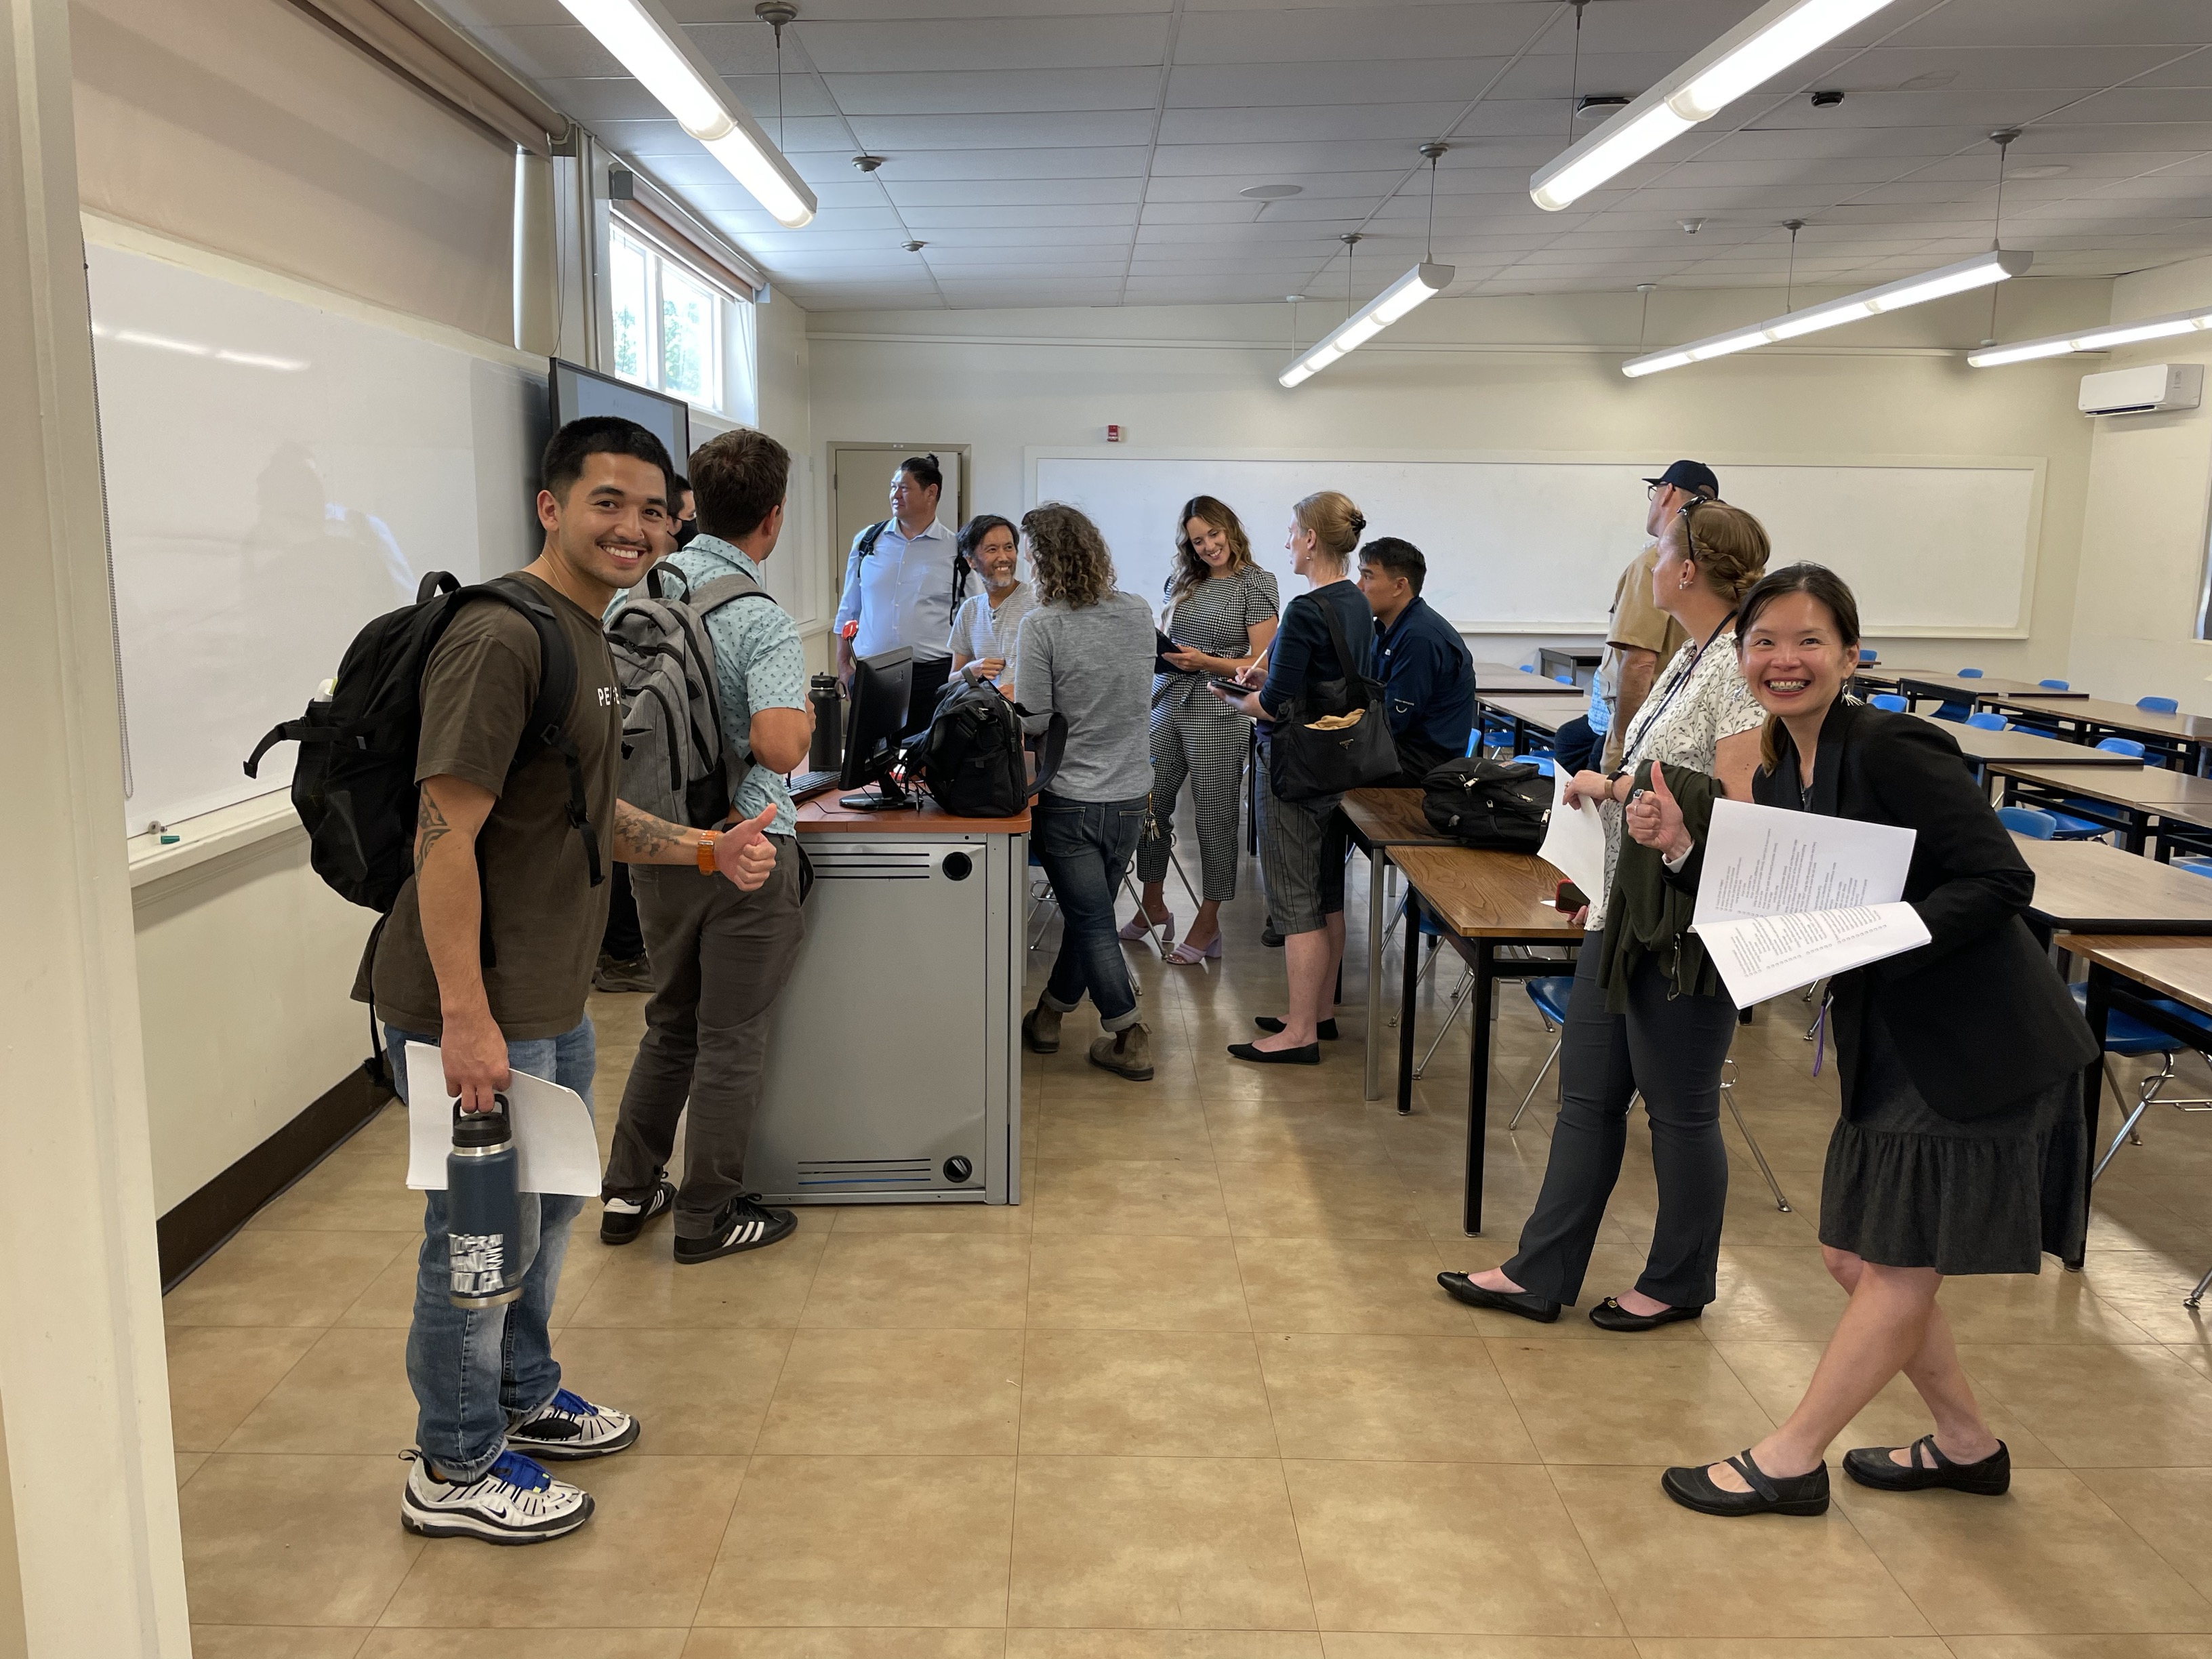 Jase Teoh (right) and her team test out some features as faculty experiment with classroom technology during faculty orientation over the summer.